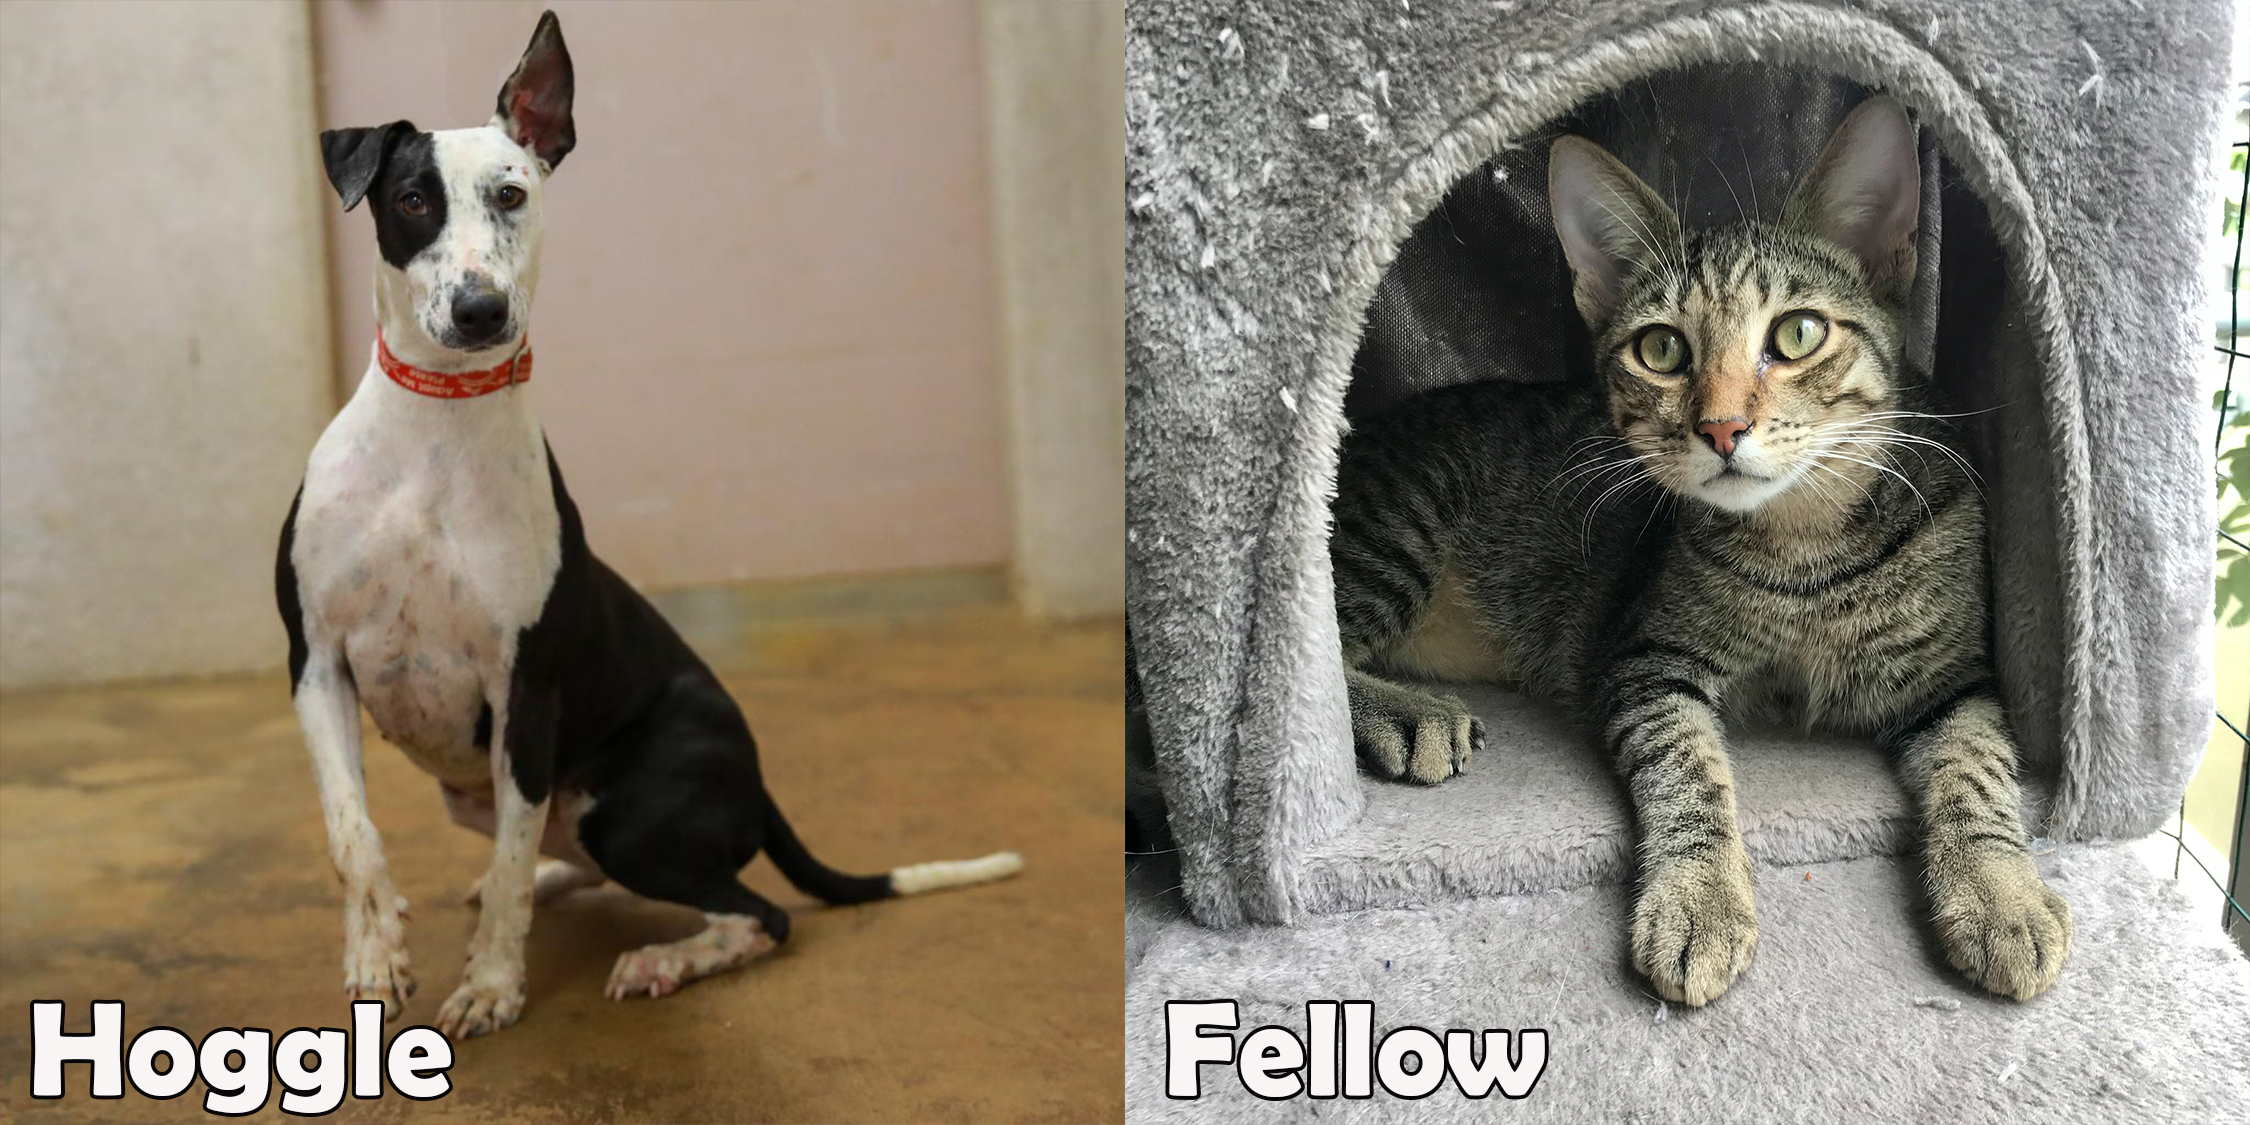 Hoggle and Fellow are our featured pets this month.